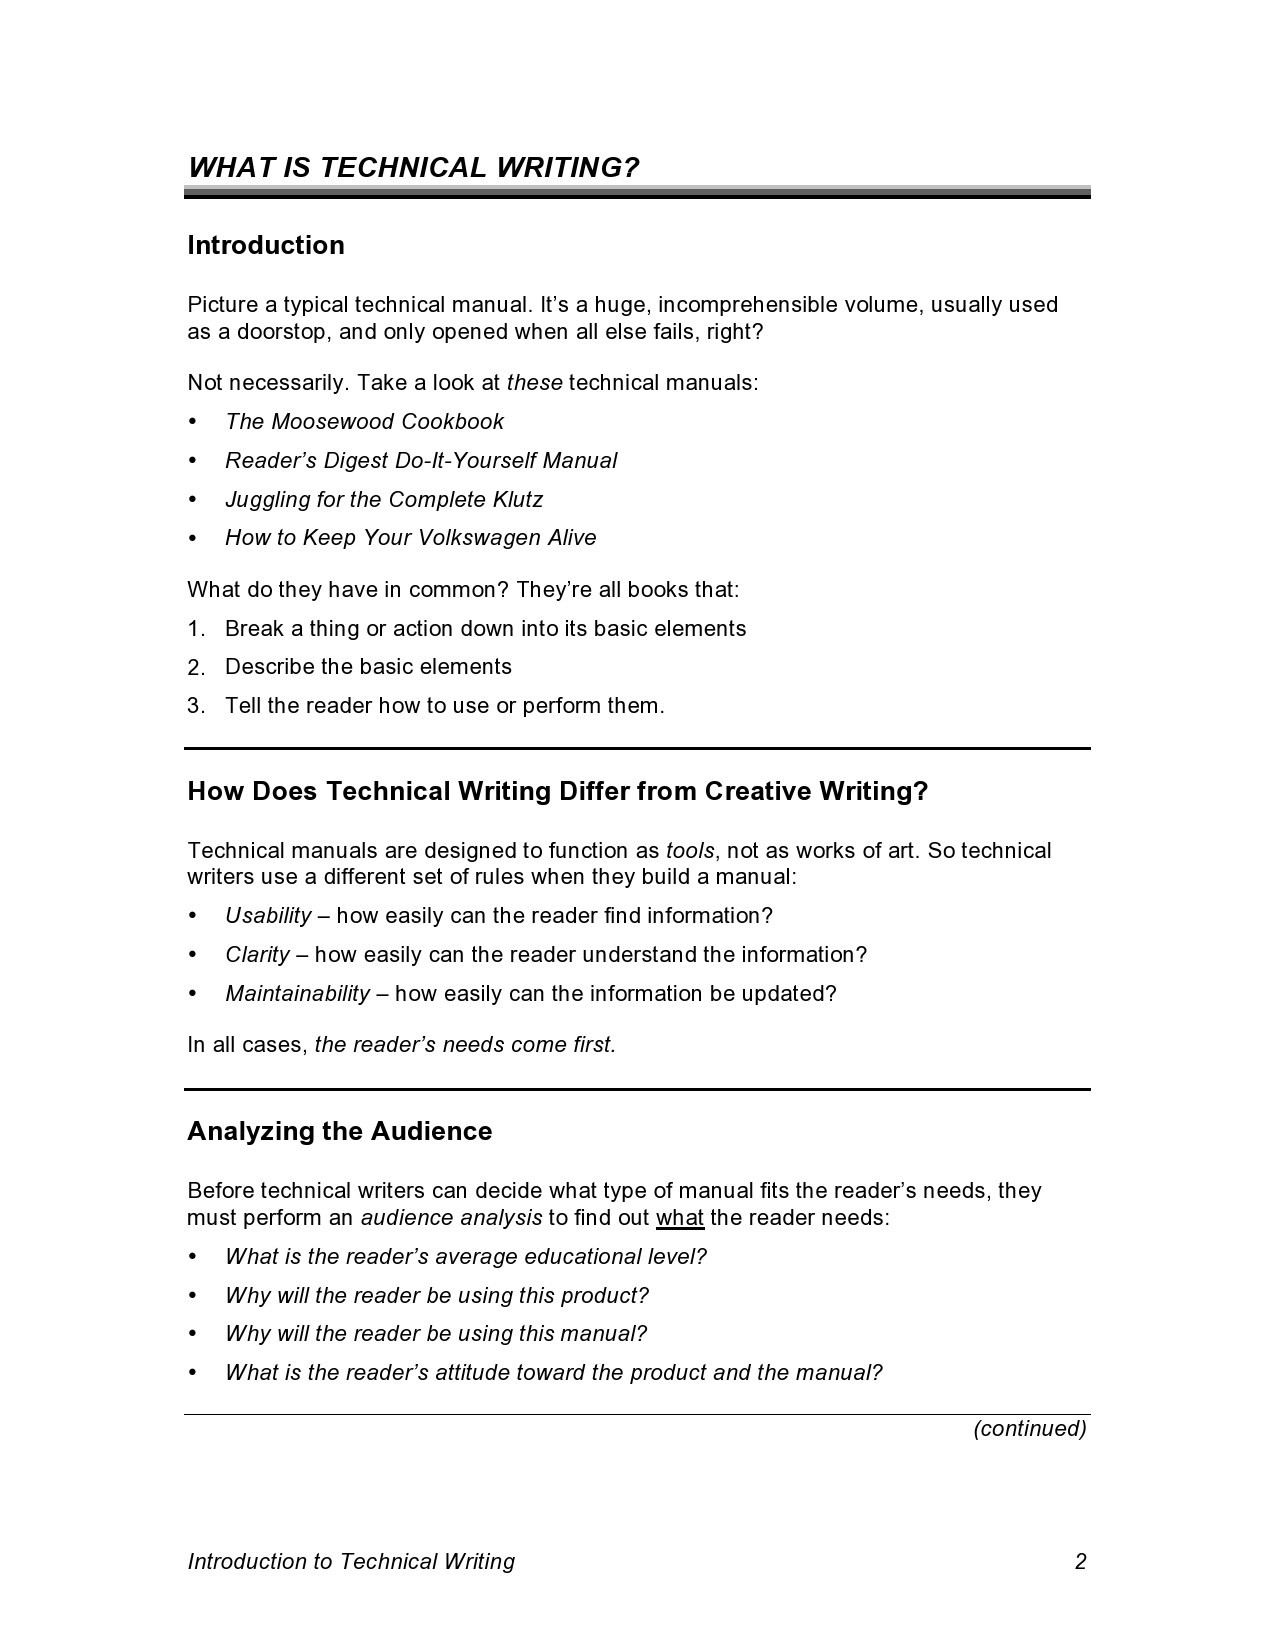 technical writing essay format